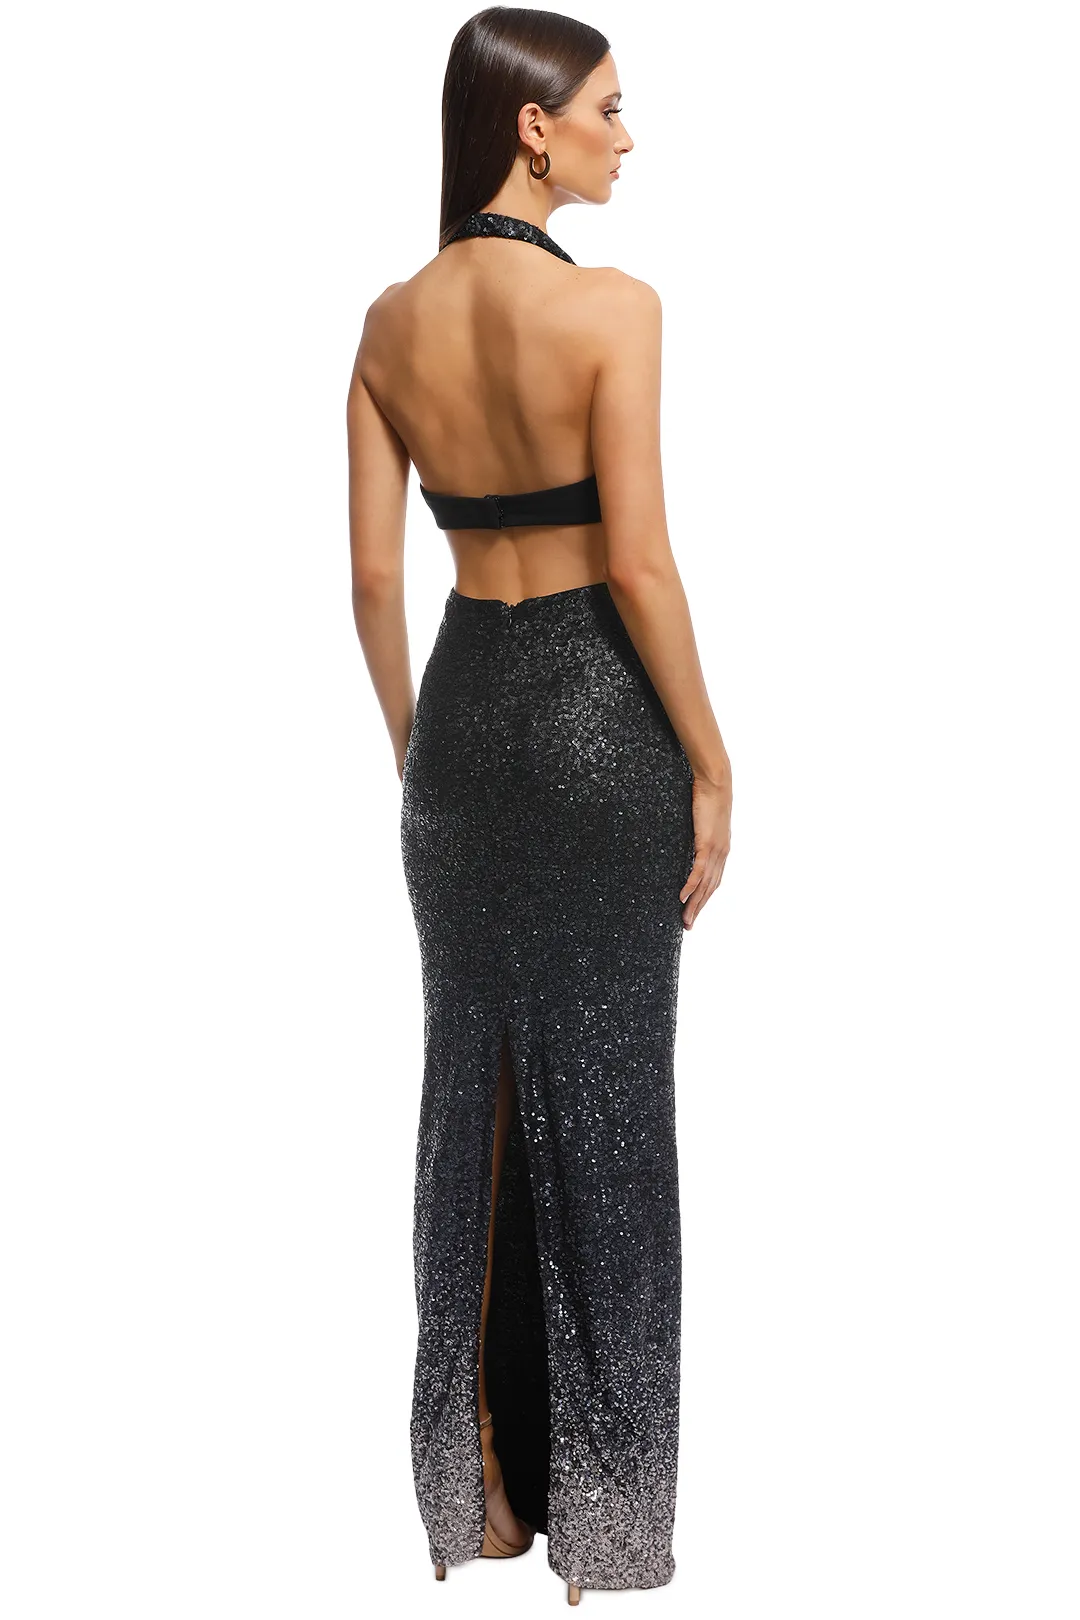 Rent the Ombre Sequin Gown for a black tie affair